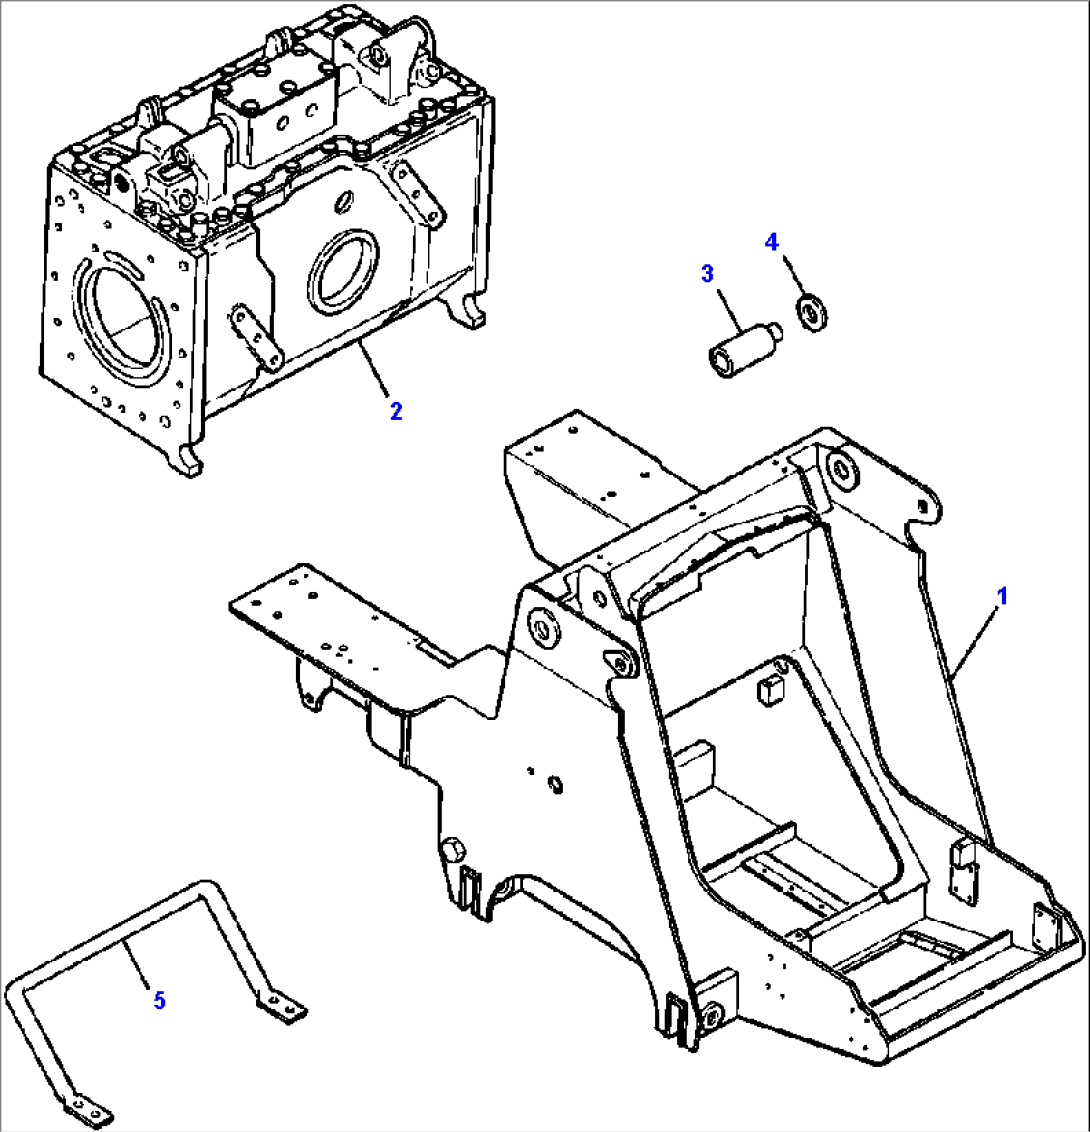 FRONT AND REAR FRAME MOUNTING